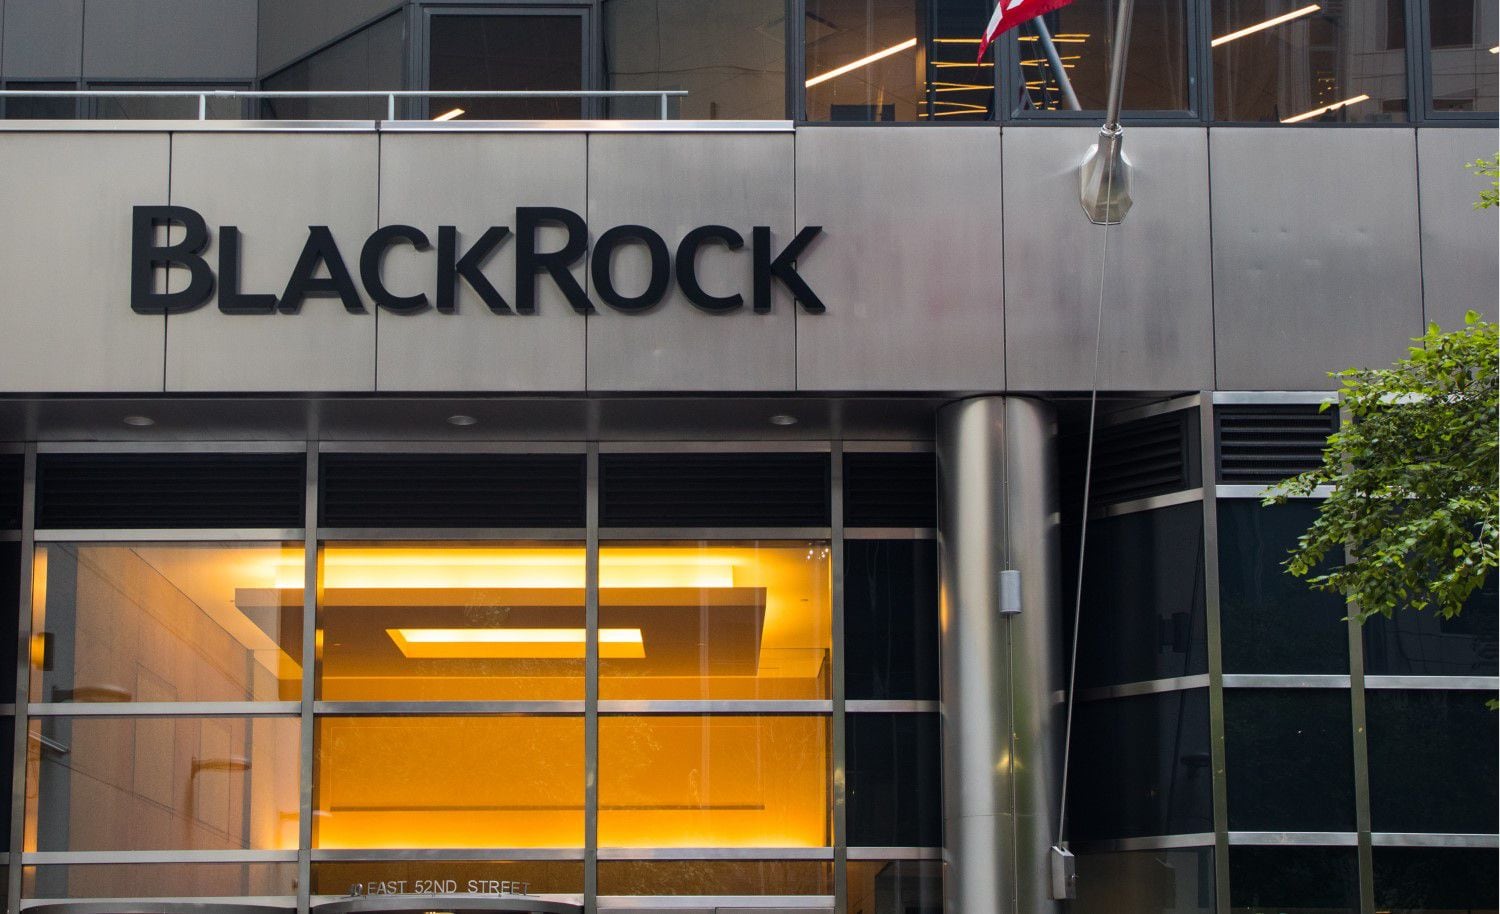 BlackRock iShares Exec Says Firm Has ‘No Current Plans’ to Launch Crypto ETFs: Report